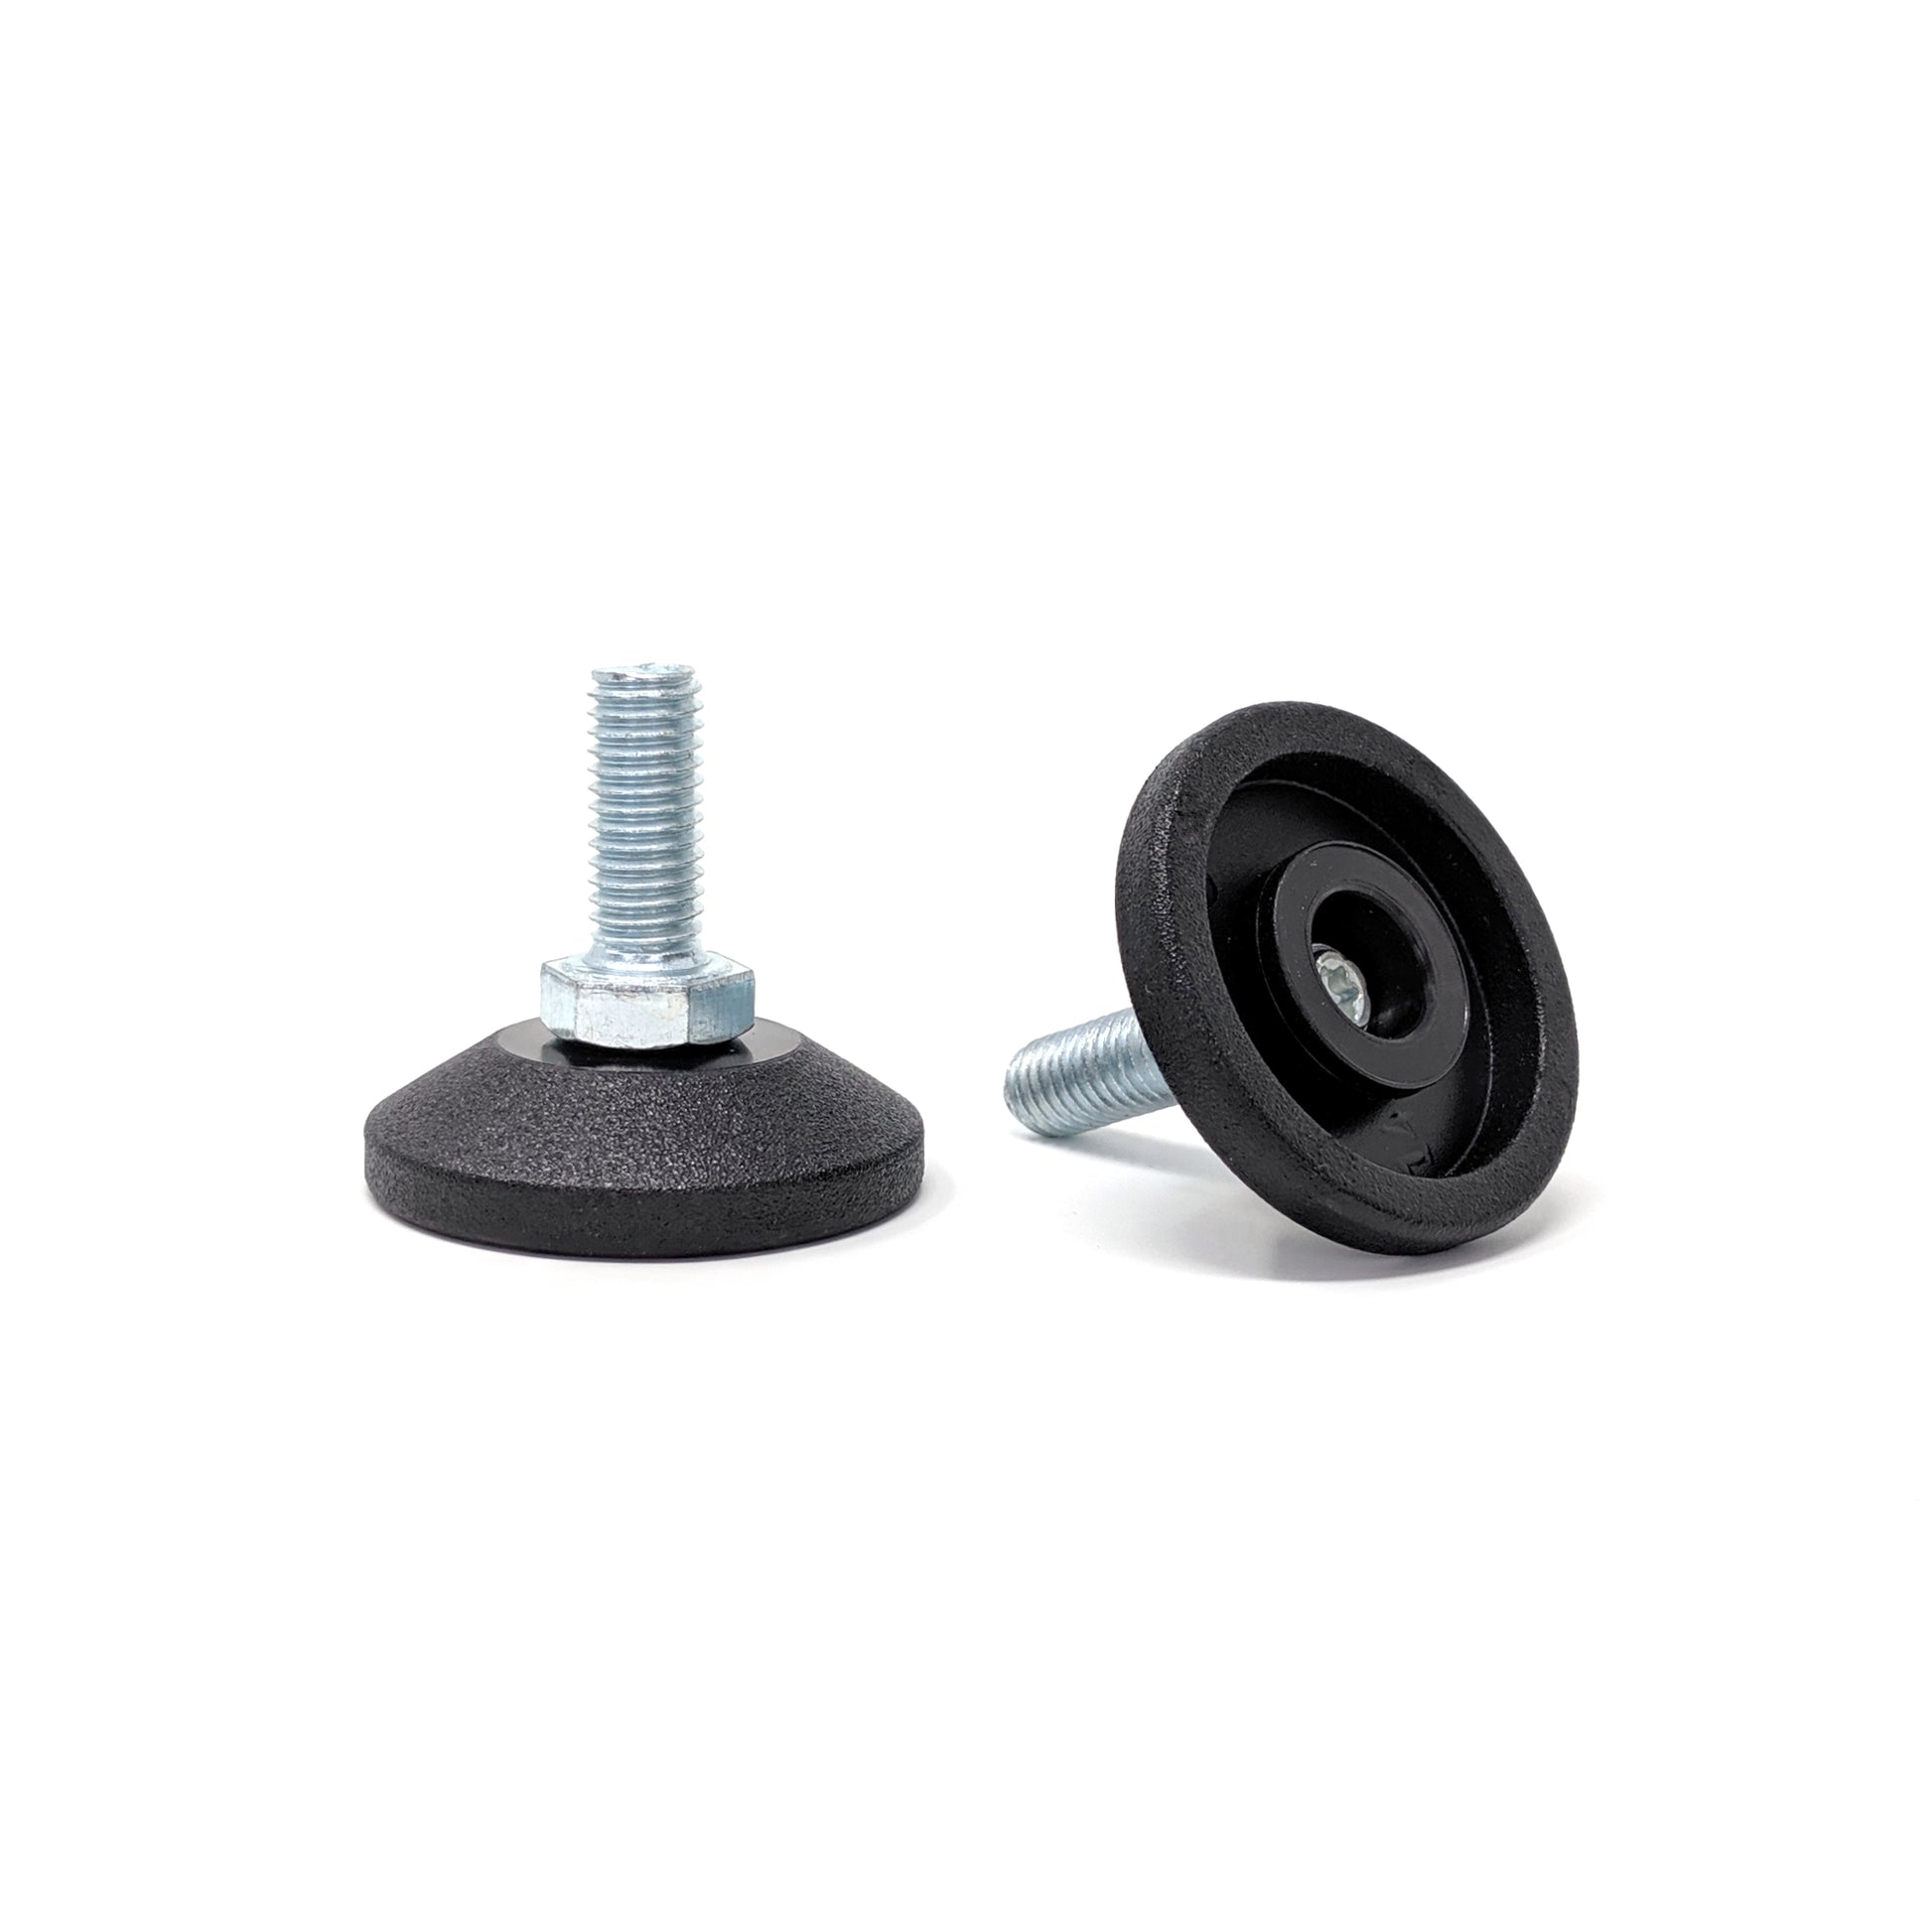 Adjustable Feet, 38mm Dia. Base, M8 20mm Thread, 400kg Static Load Capacity - Made In Germany - Keay Vital Parts